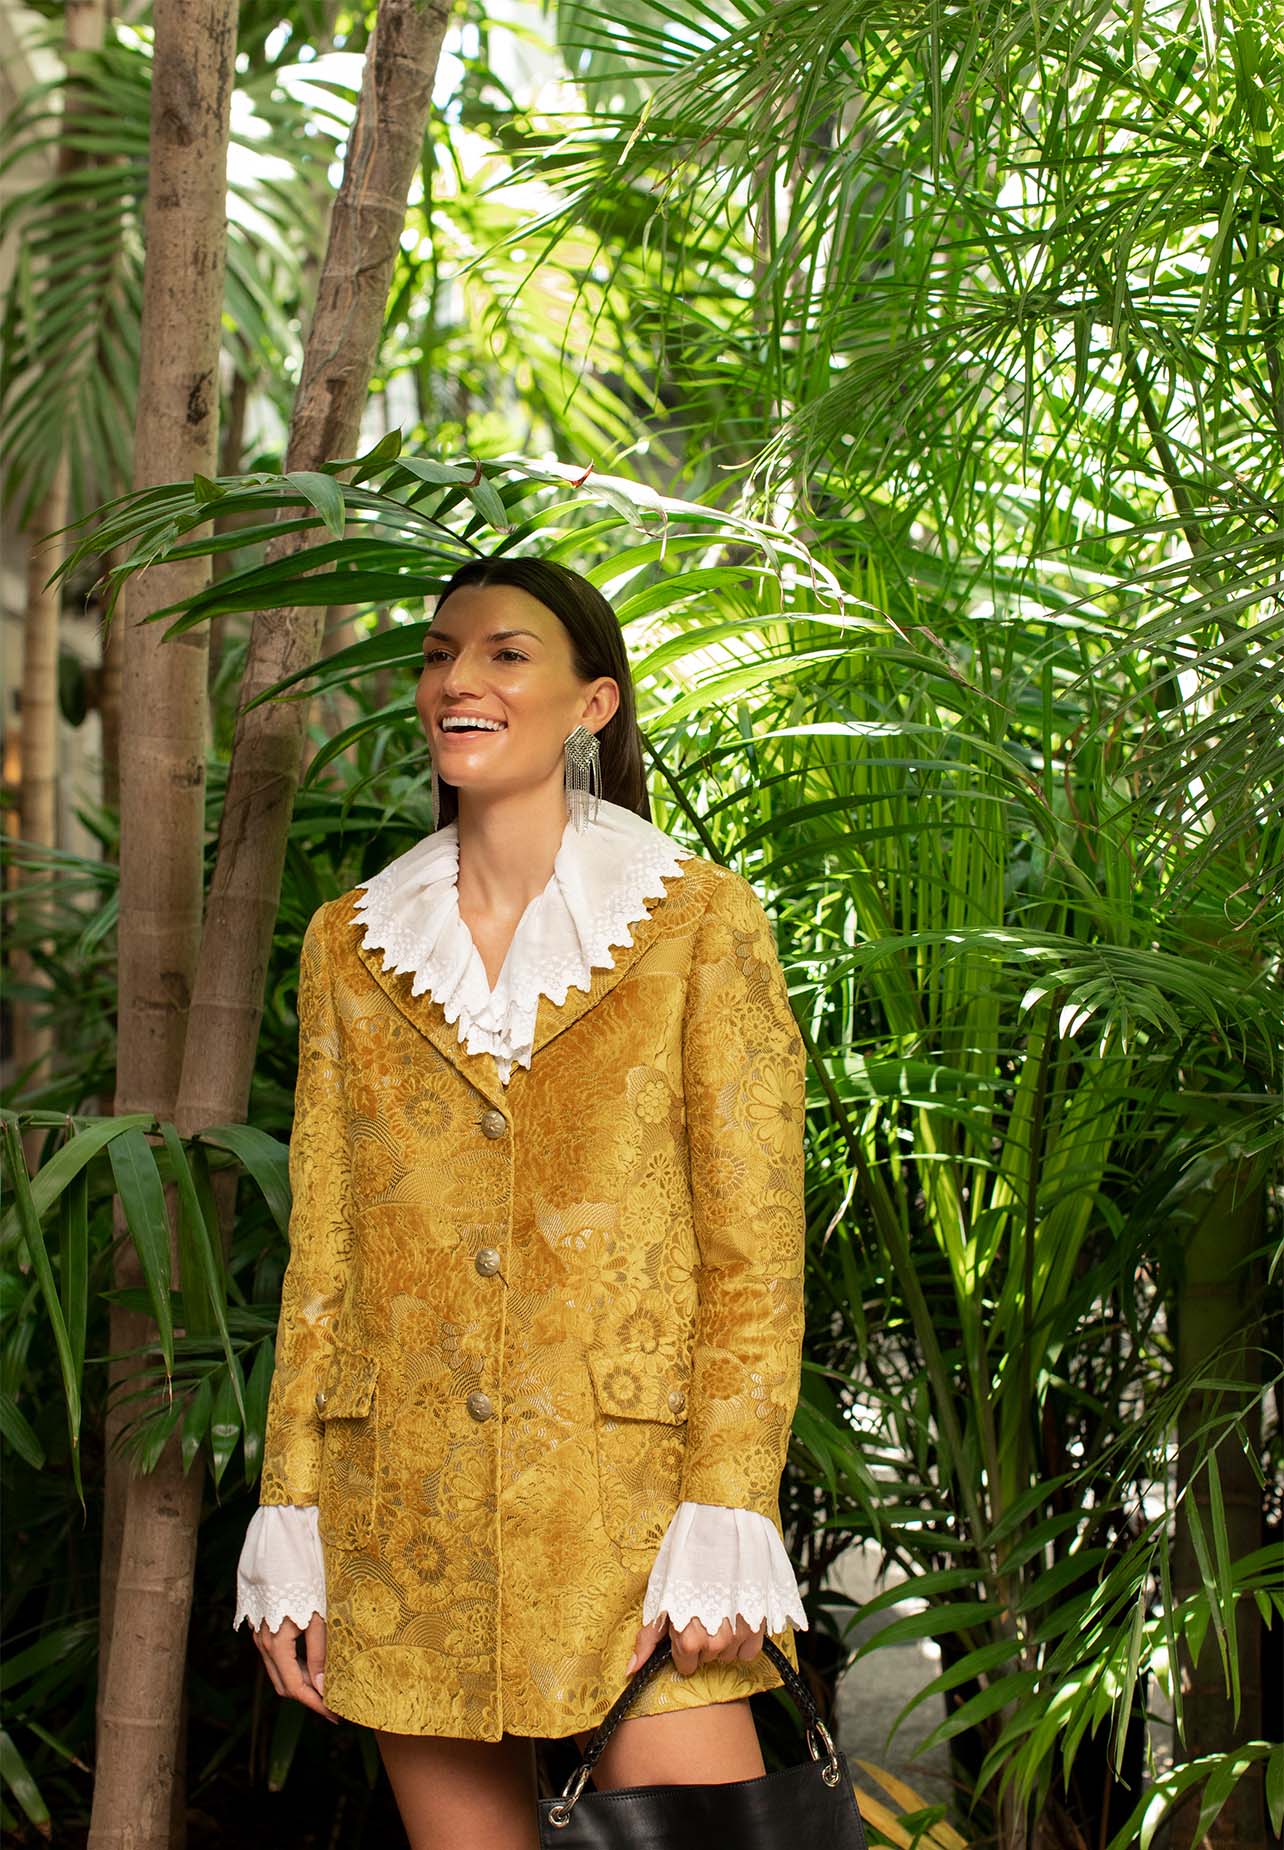 Woman smiling in front of palm trees wearing a yellow Etro coat with a white blouse underneath